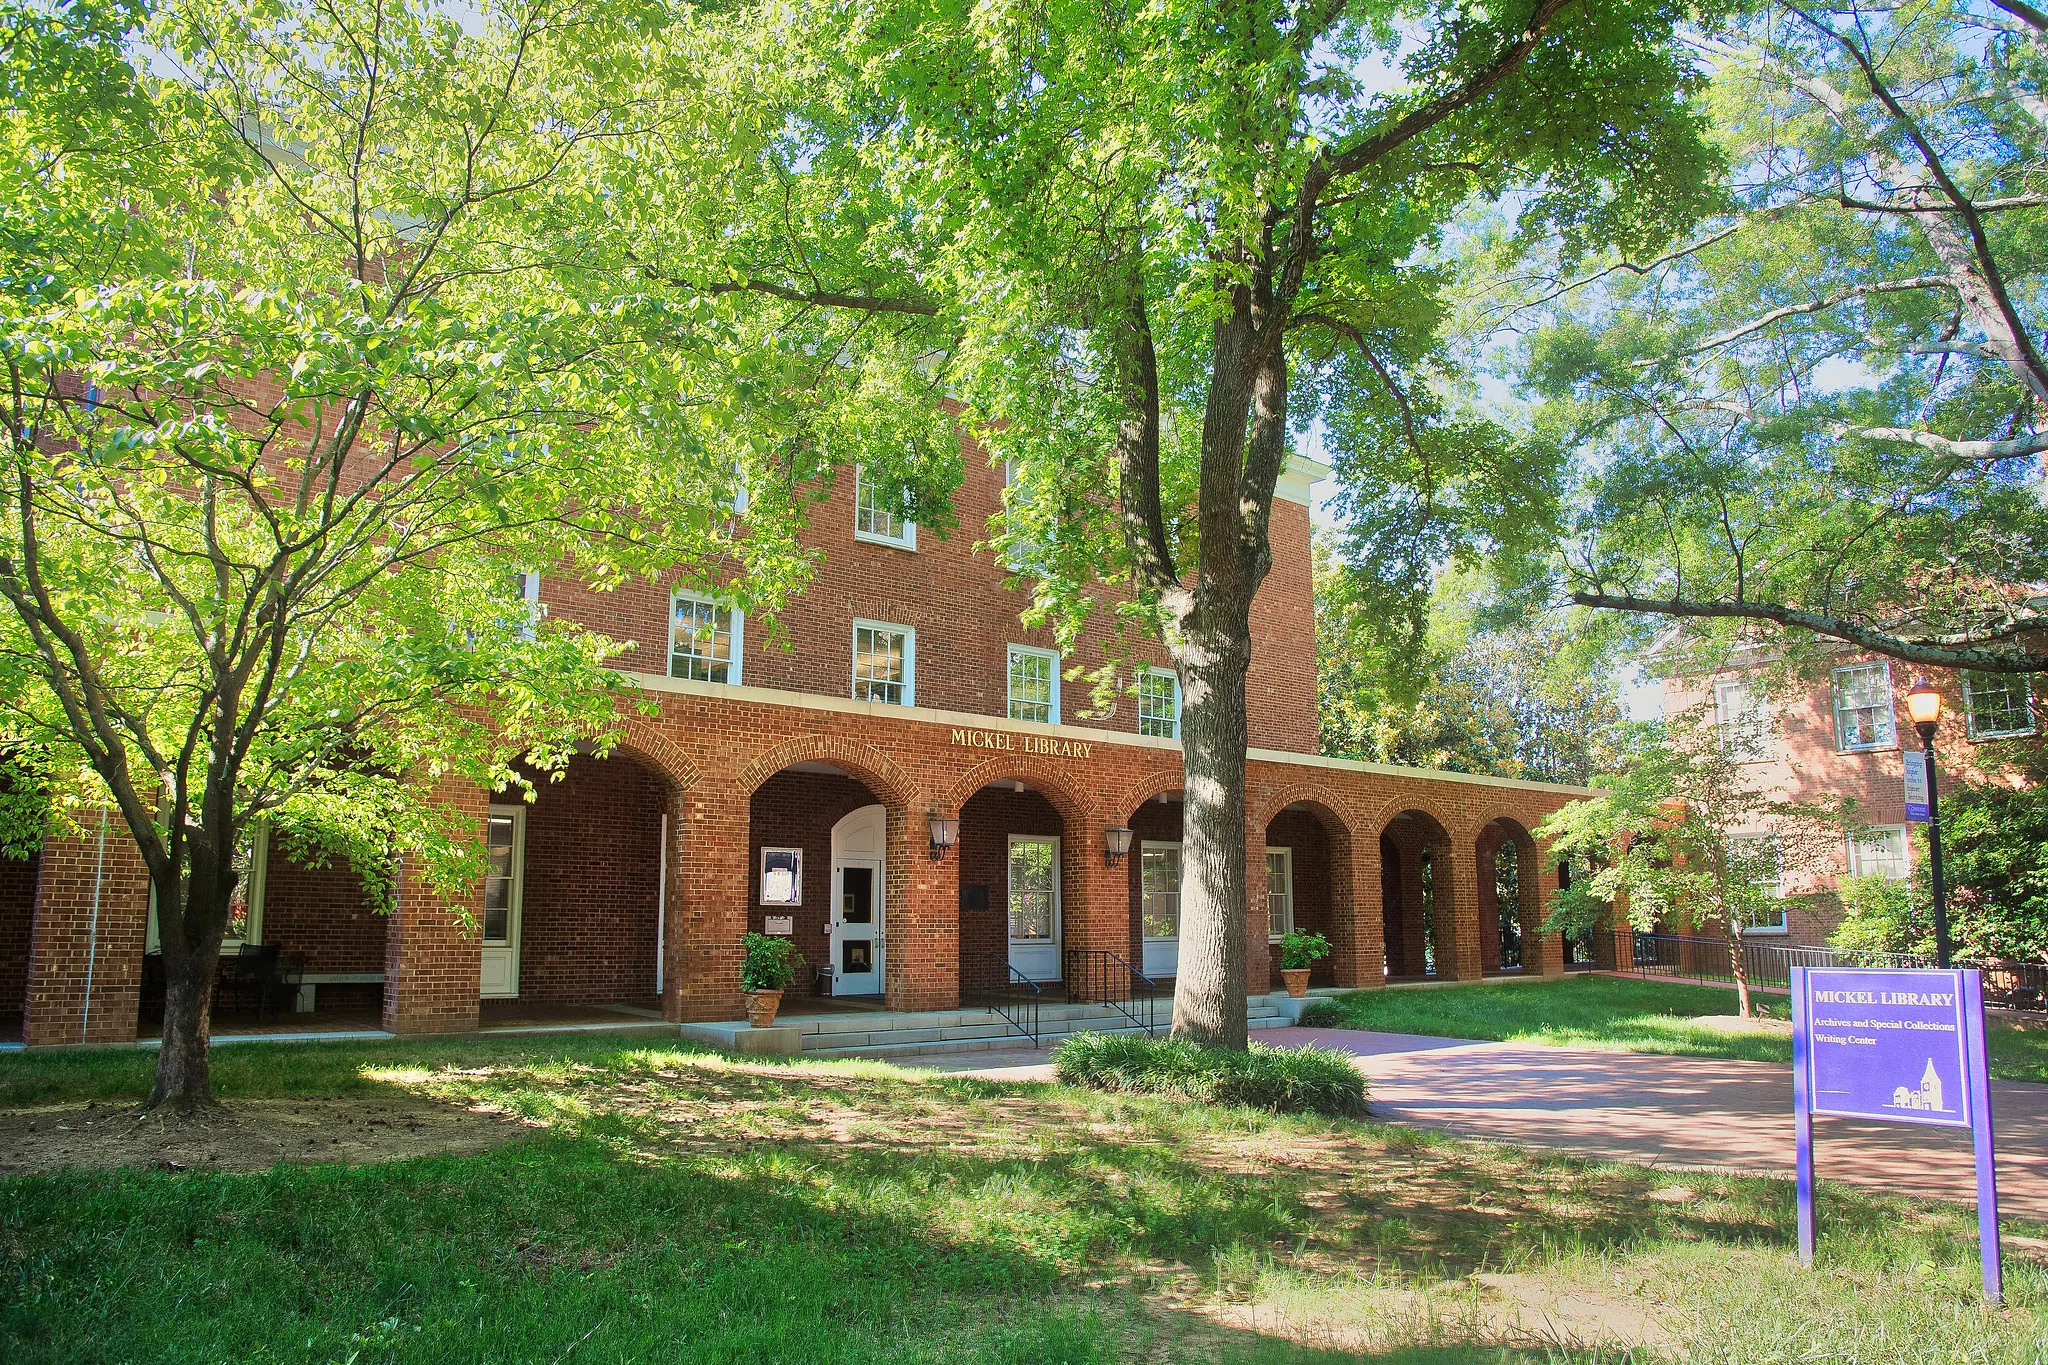 Three story brick building with eight brick arches leading to a covered porch. The words "Mickel Library" appear in gold letters above the center arches.